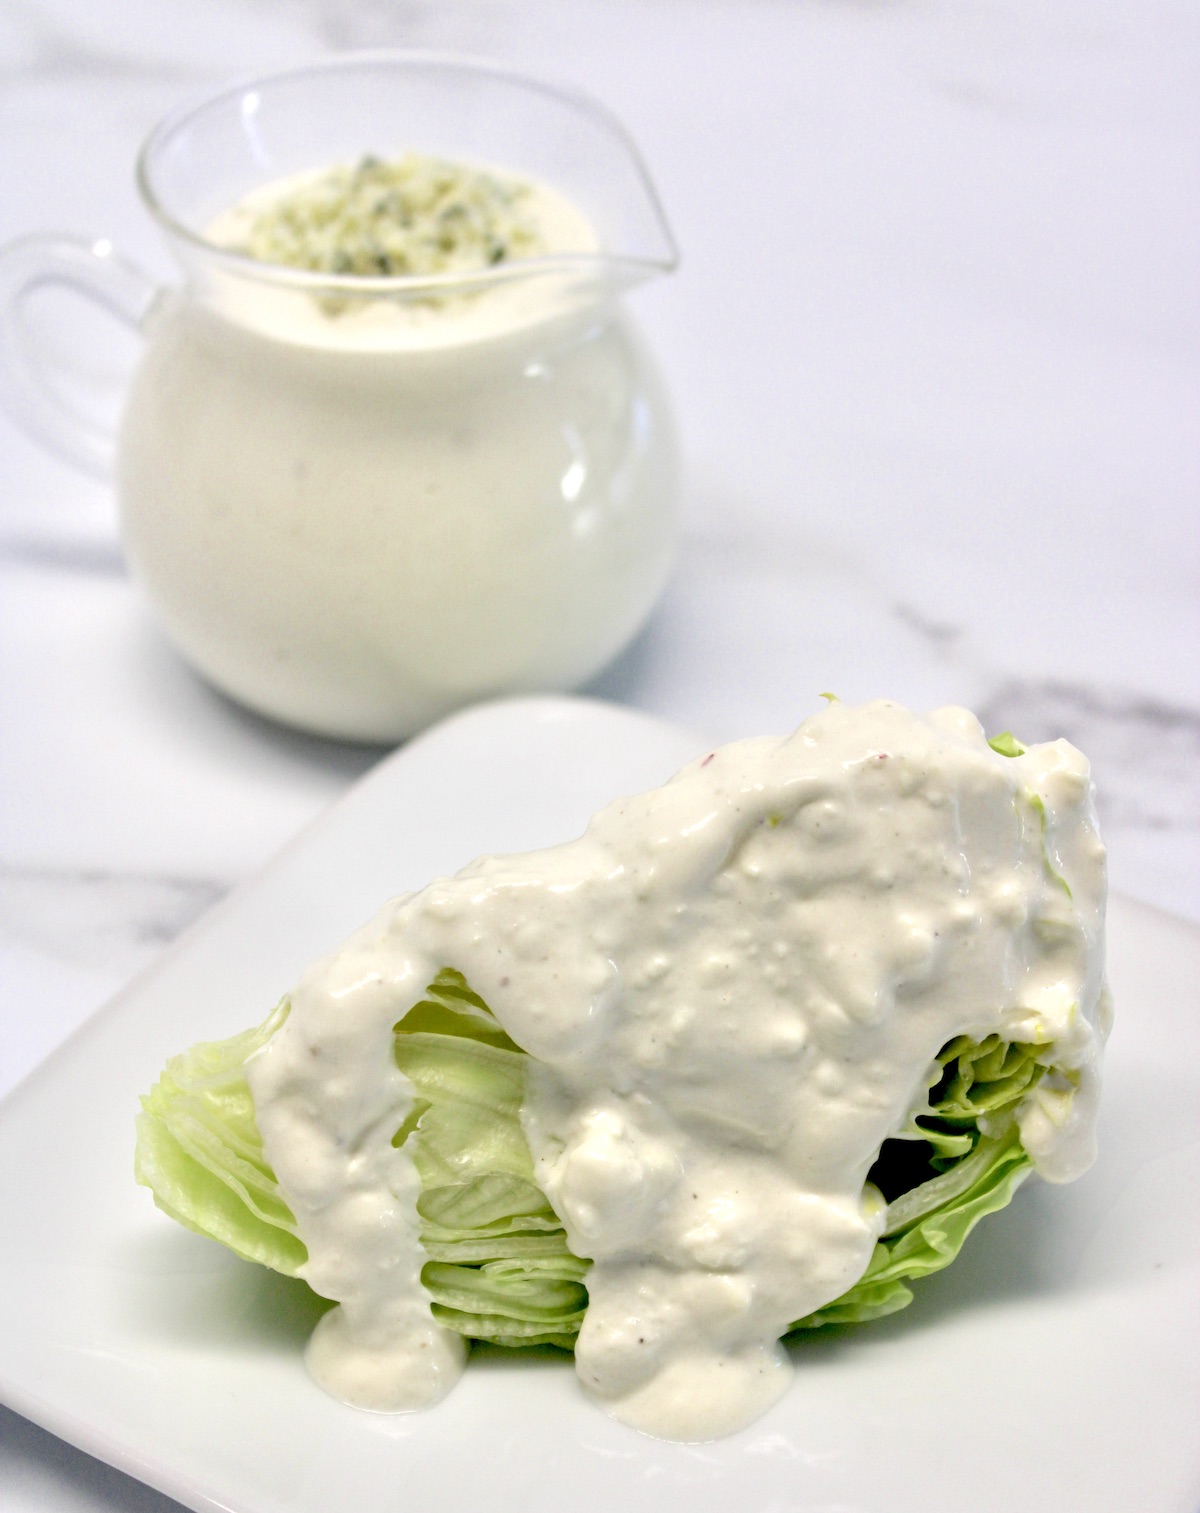 Keto Blue Cheese Dressing over iceberg wedge on white plate with glass pitcher in background